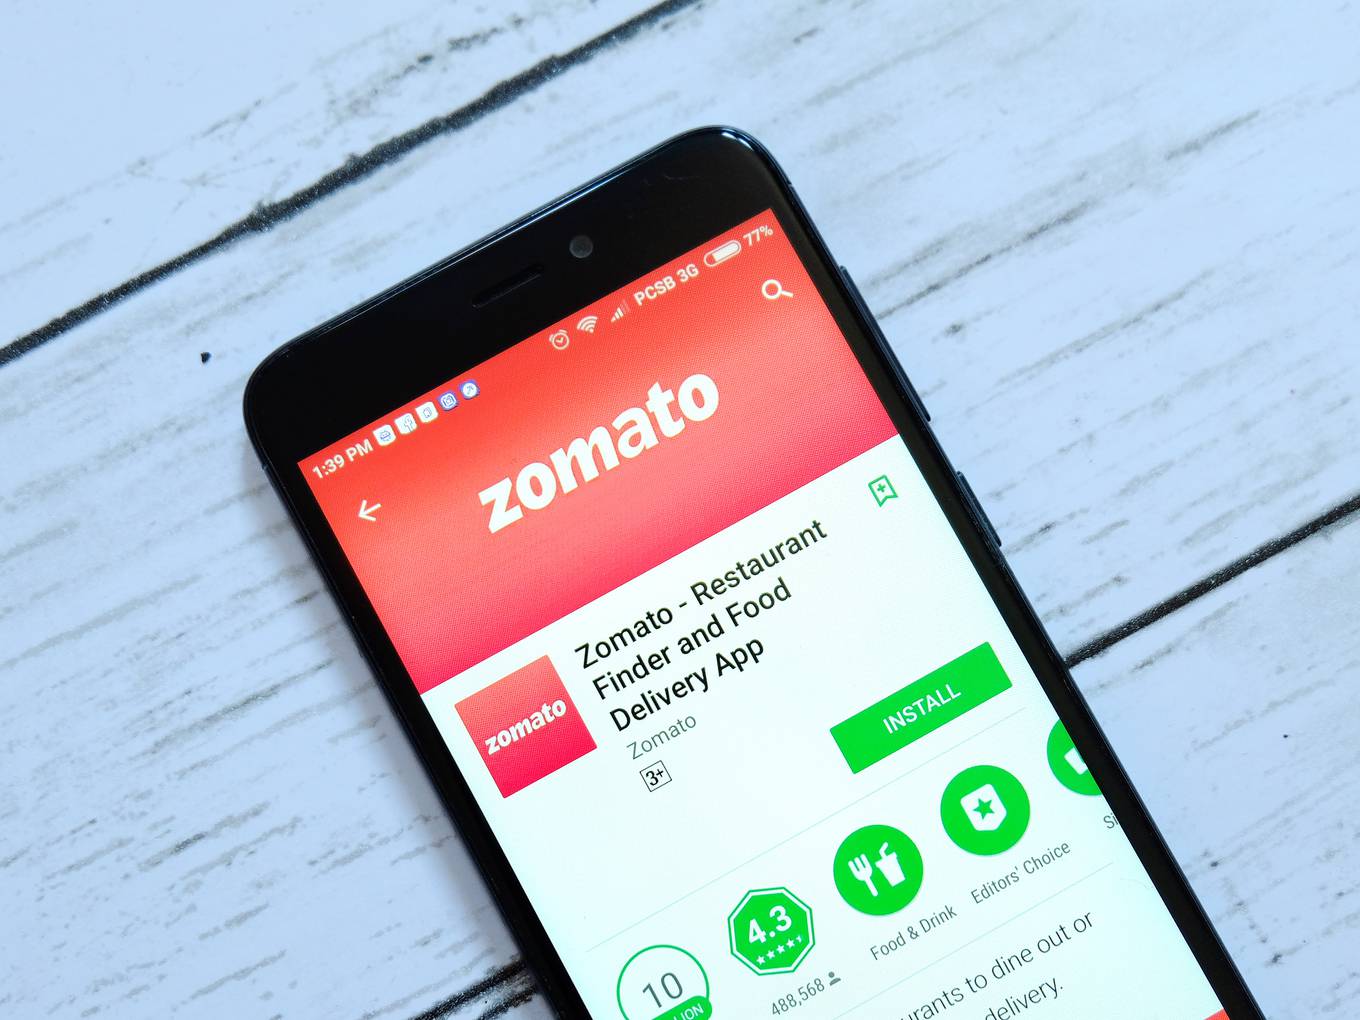 Zomato Lays Off Customer Support Employees To Cut Costs